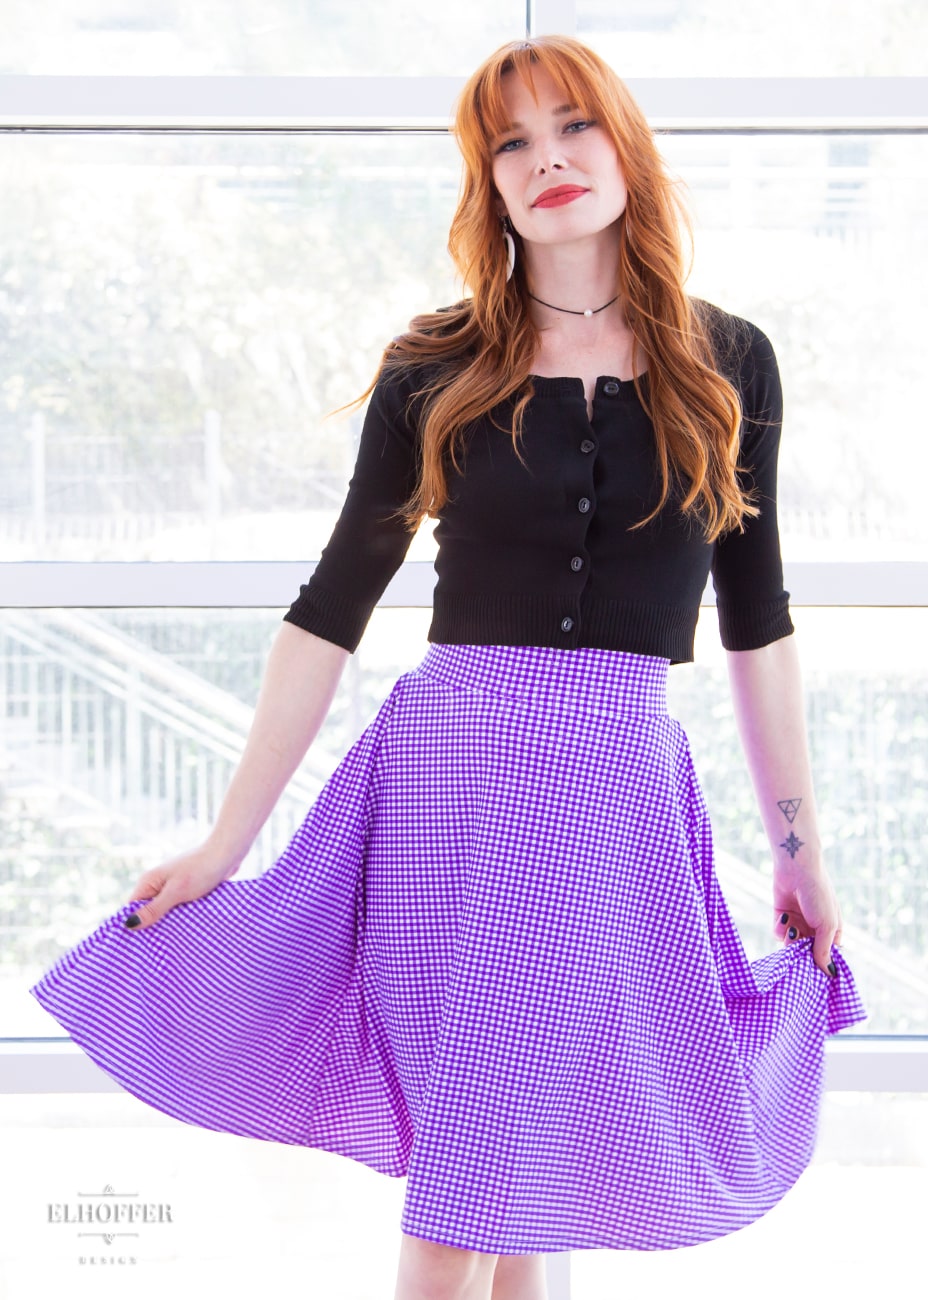 Chloe, a fair skinned size XS model with red hair and bangs, wears a high-waisted knee length full skirt with a fitted matching waistband encased with elastic in our grape gingham. The grape gingham print is a bright purple gingham.